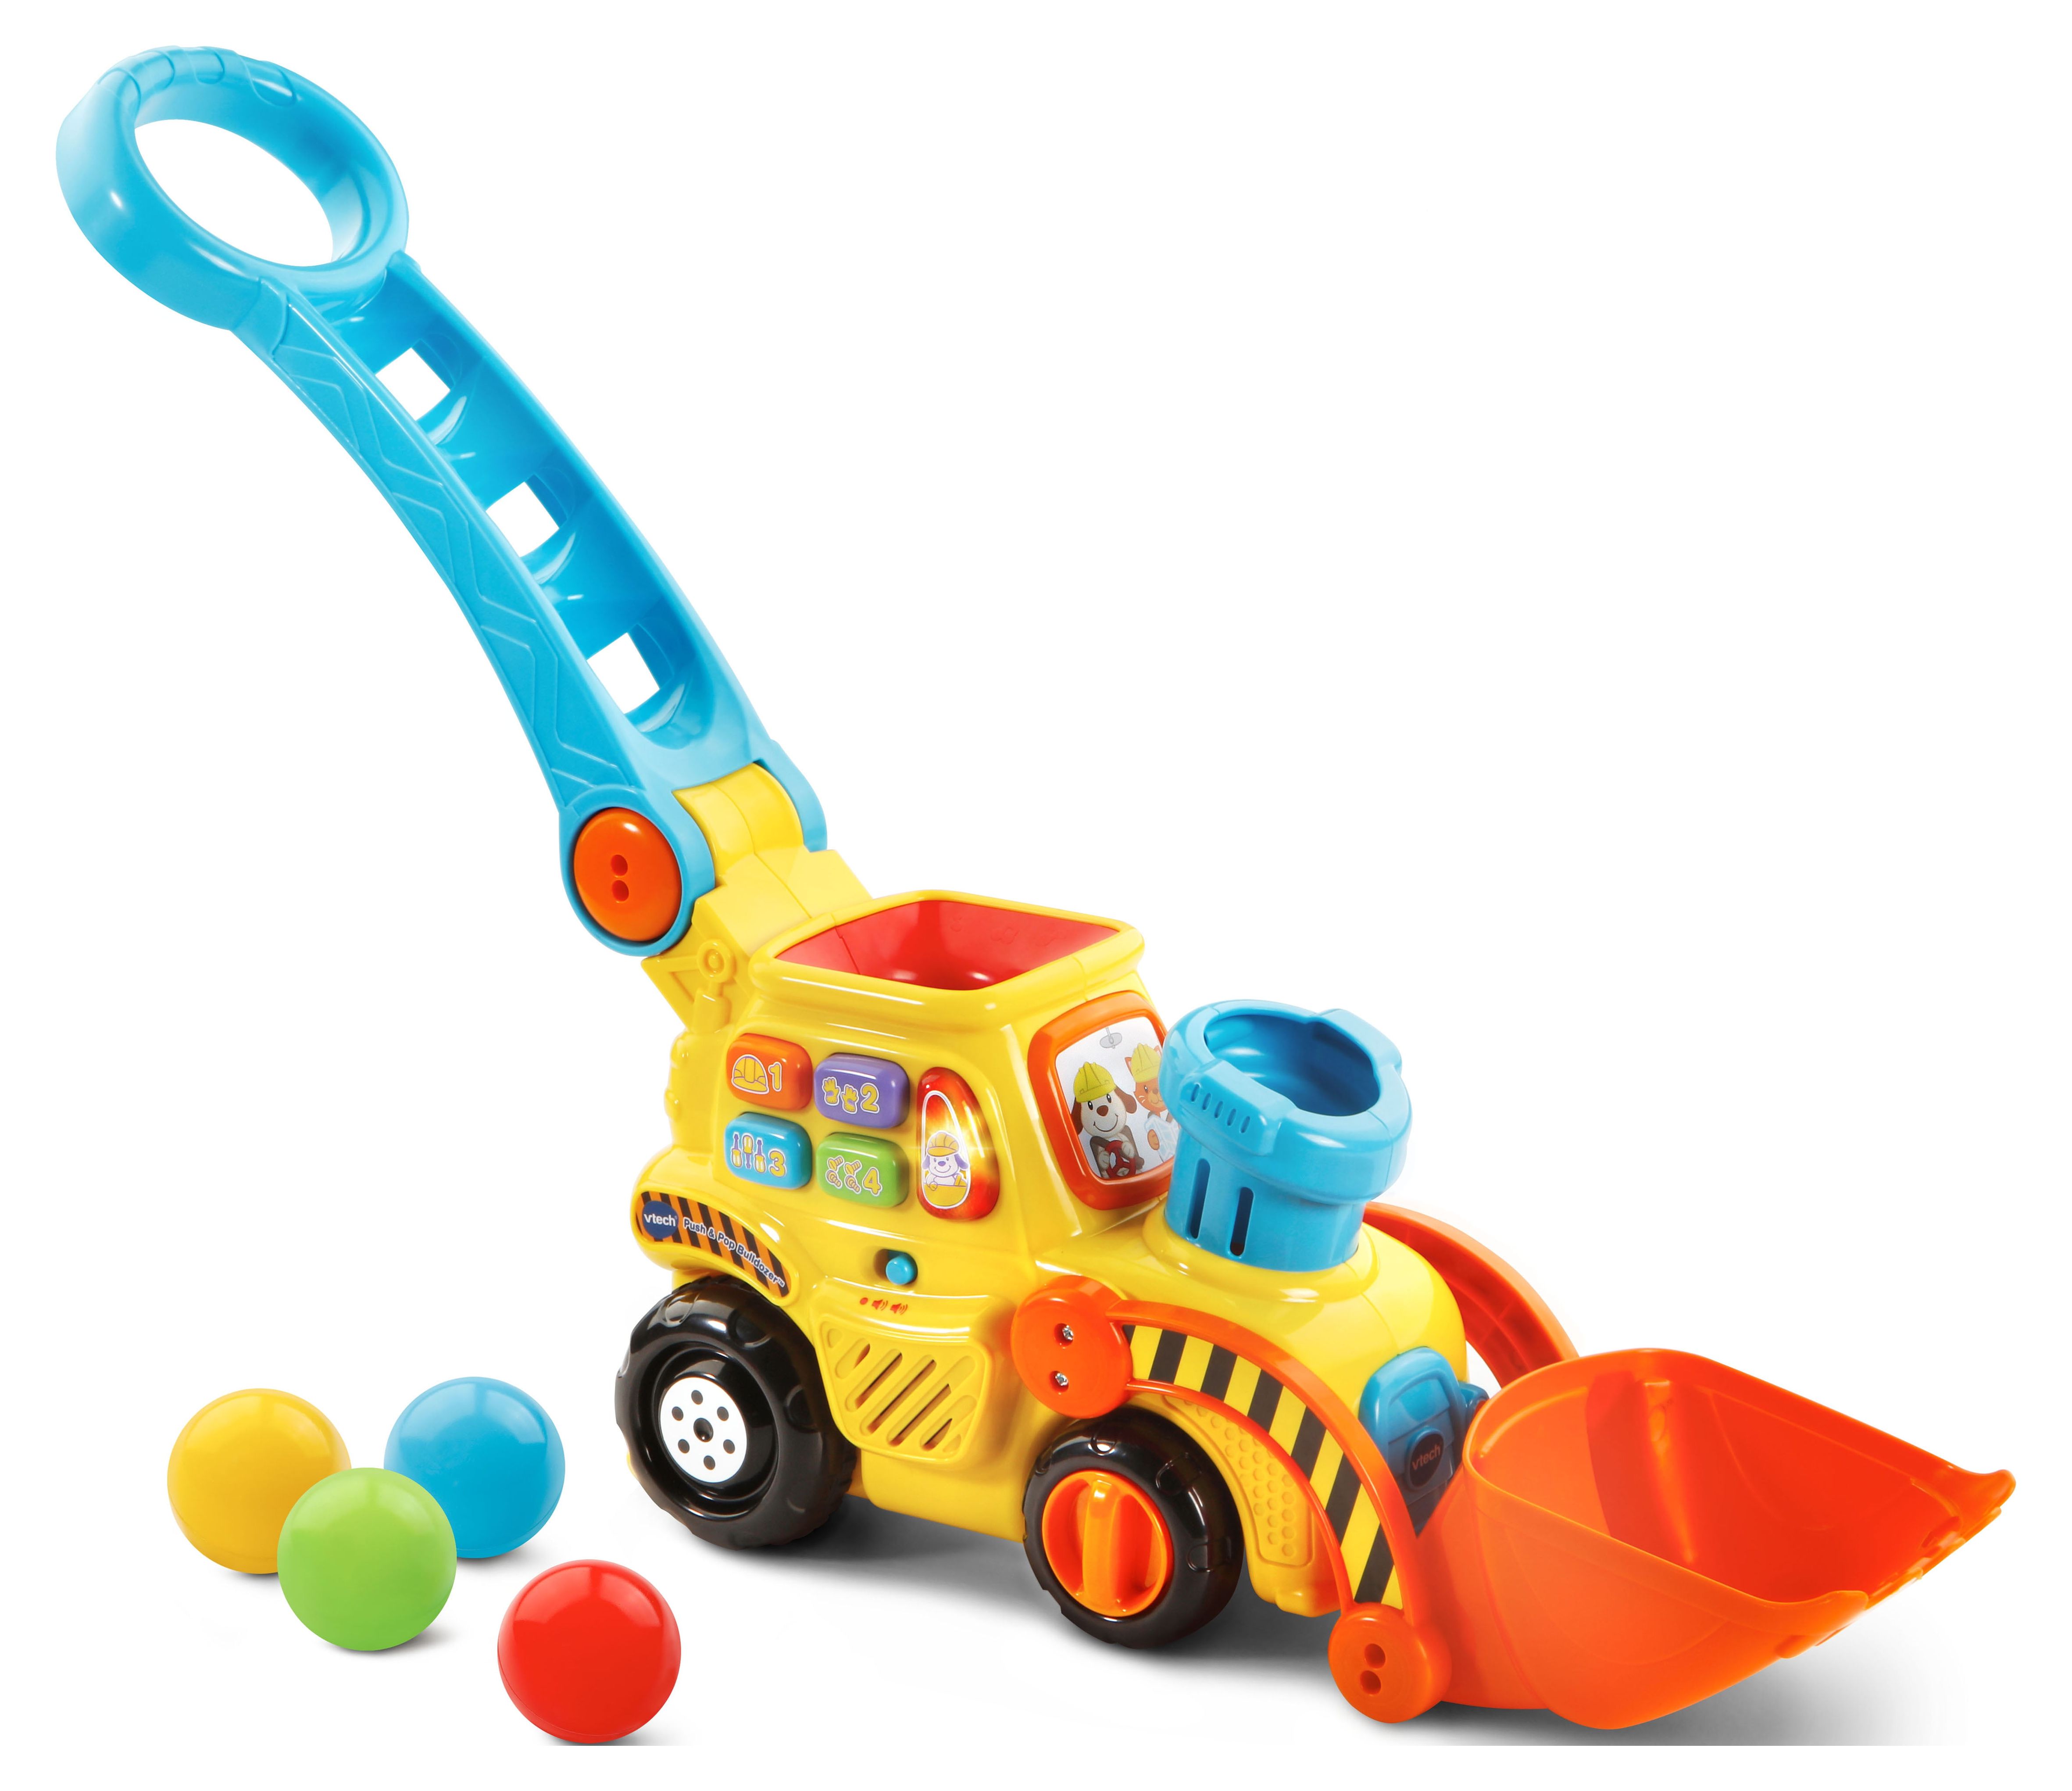 VTech, Pop-a-Balls, Push and Pop Bulldozer, Toddler Learning Toy - image 1 of 12